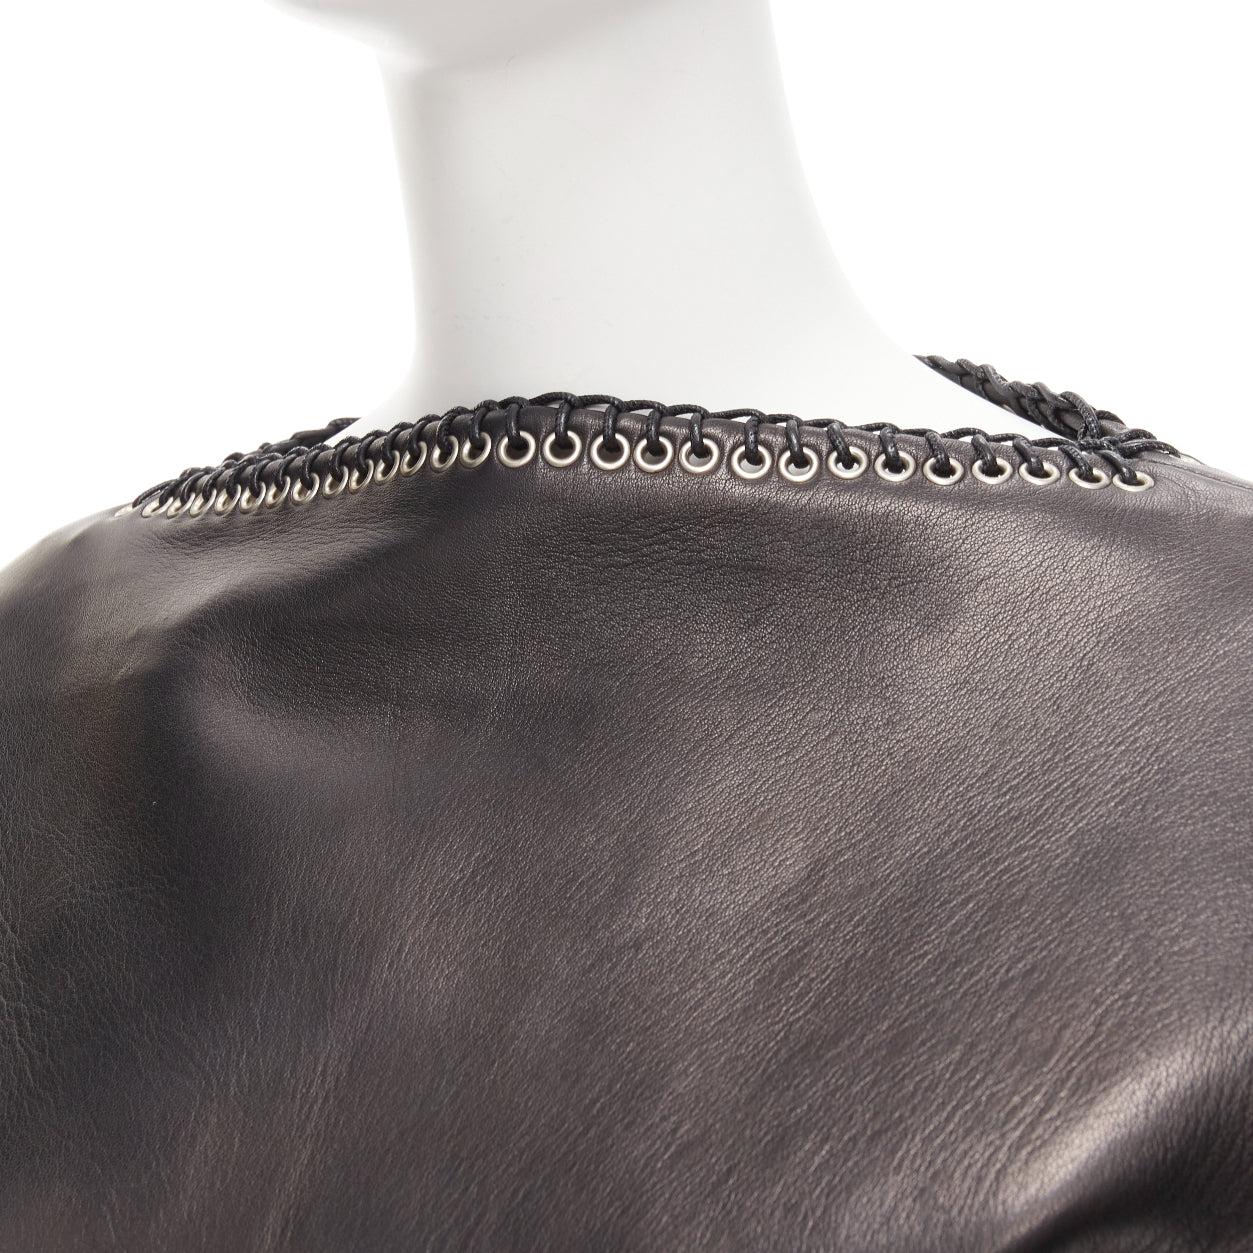 BALENCIAGA 2014 black lambskin leather grommet stud boxy cropped top FR36 S For Sale 2